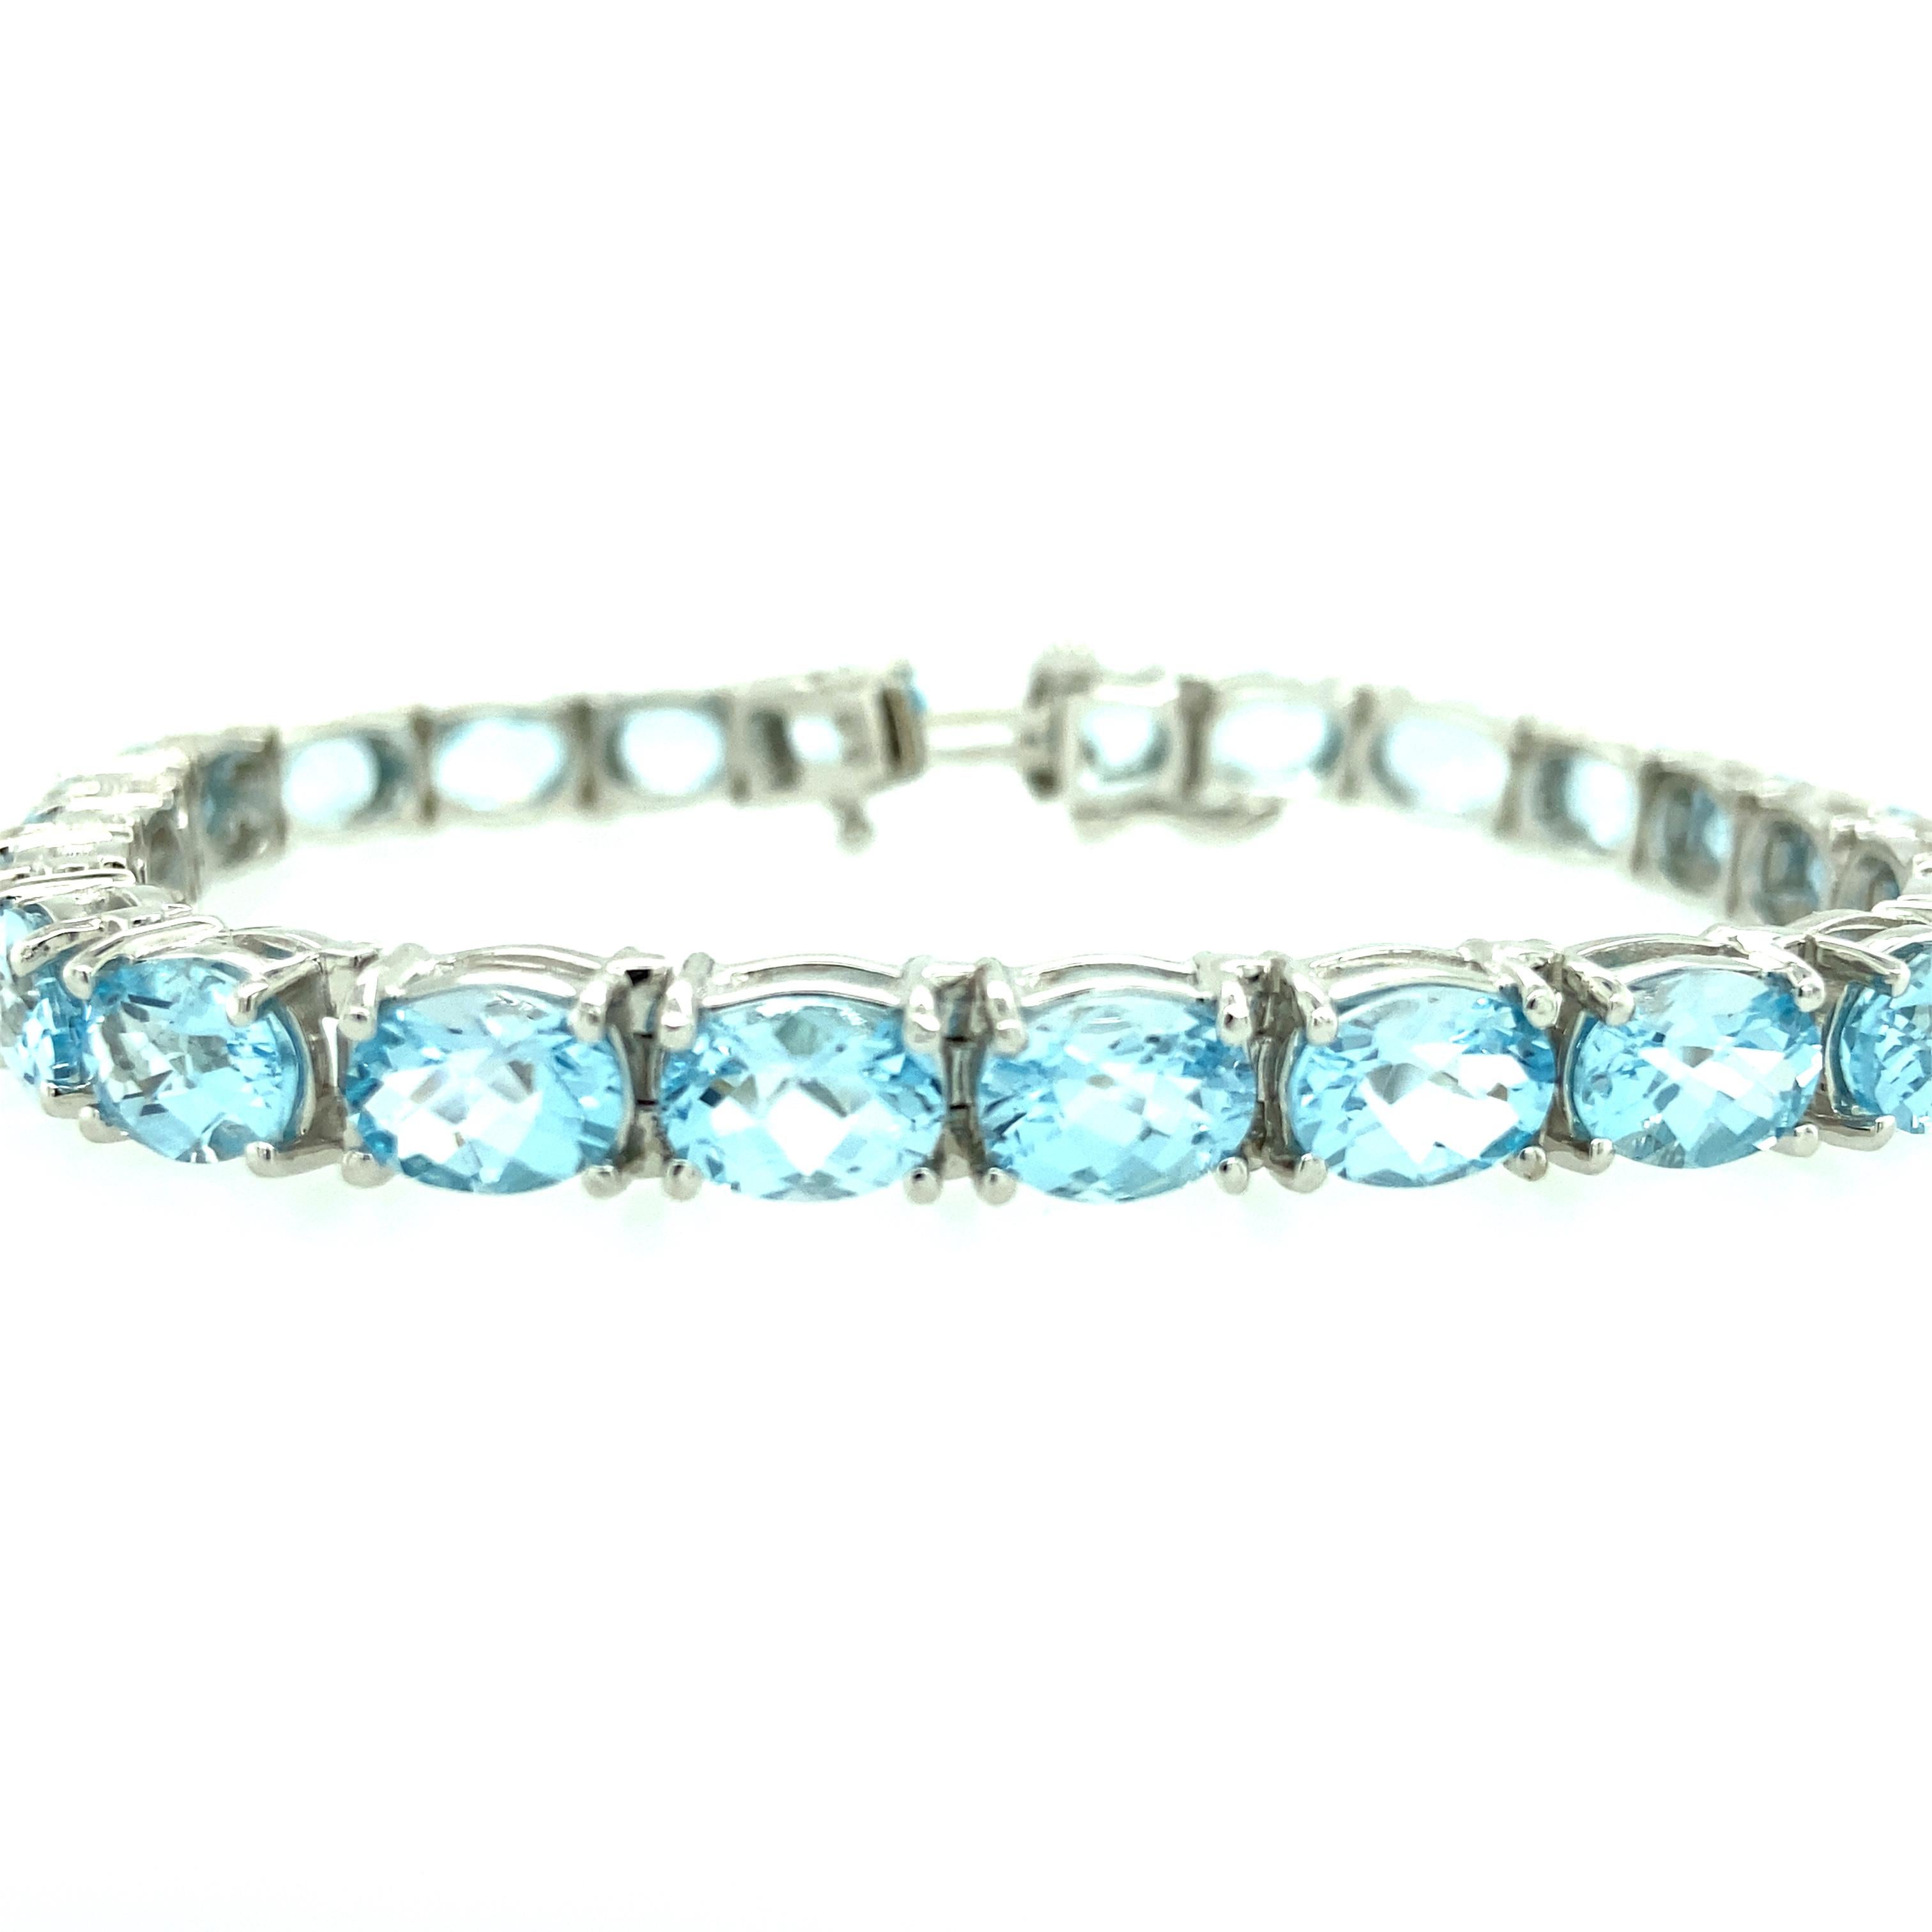 One 14 karat white gold estate line bracelet set with twenty-four oval blue topaz.  The bracelet measures 8 inches long and is secure with a box clasp and safety closure.